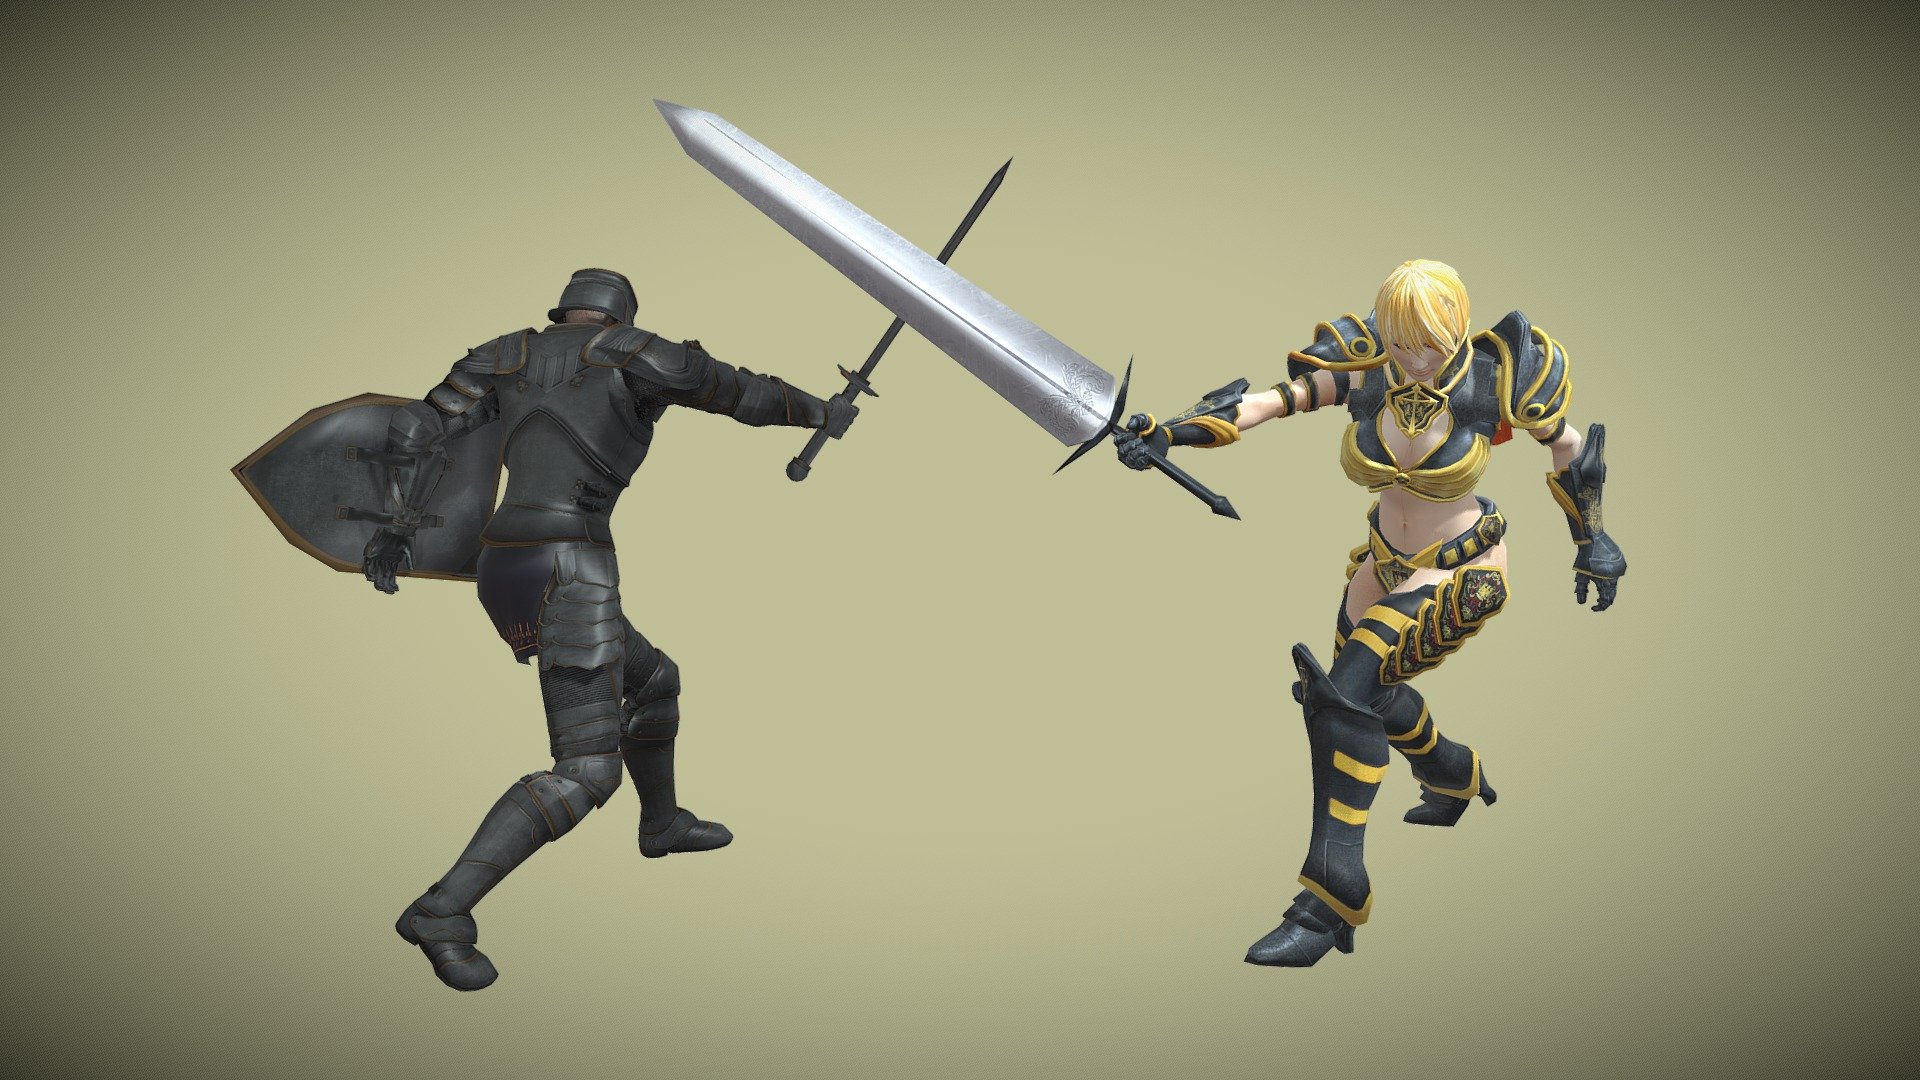 A knight in a suit of armour and a female battle character with a broad sword swing at each other in this looping animation at 30 frames per second.

See this 3D model in action, and more models like it, here in this collection of free augmeneted reality apps:

https://morpheusar.com/ - Animated Knight vs. Broad Sword Fight - 3D model by LasquetiSpice 3d model